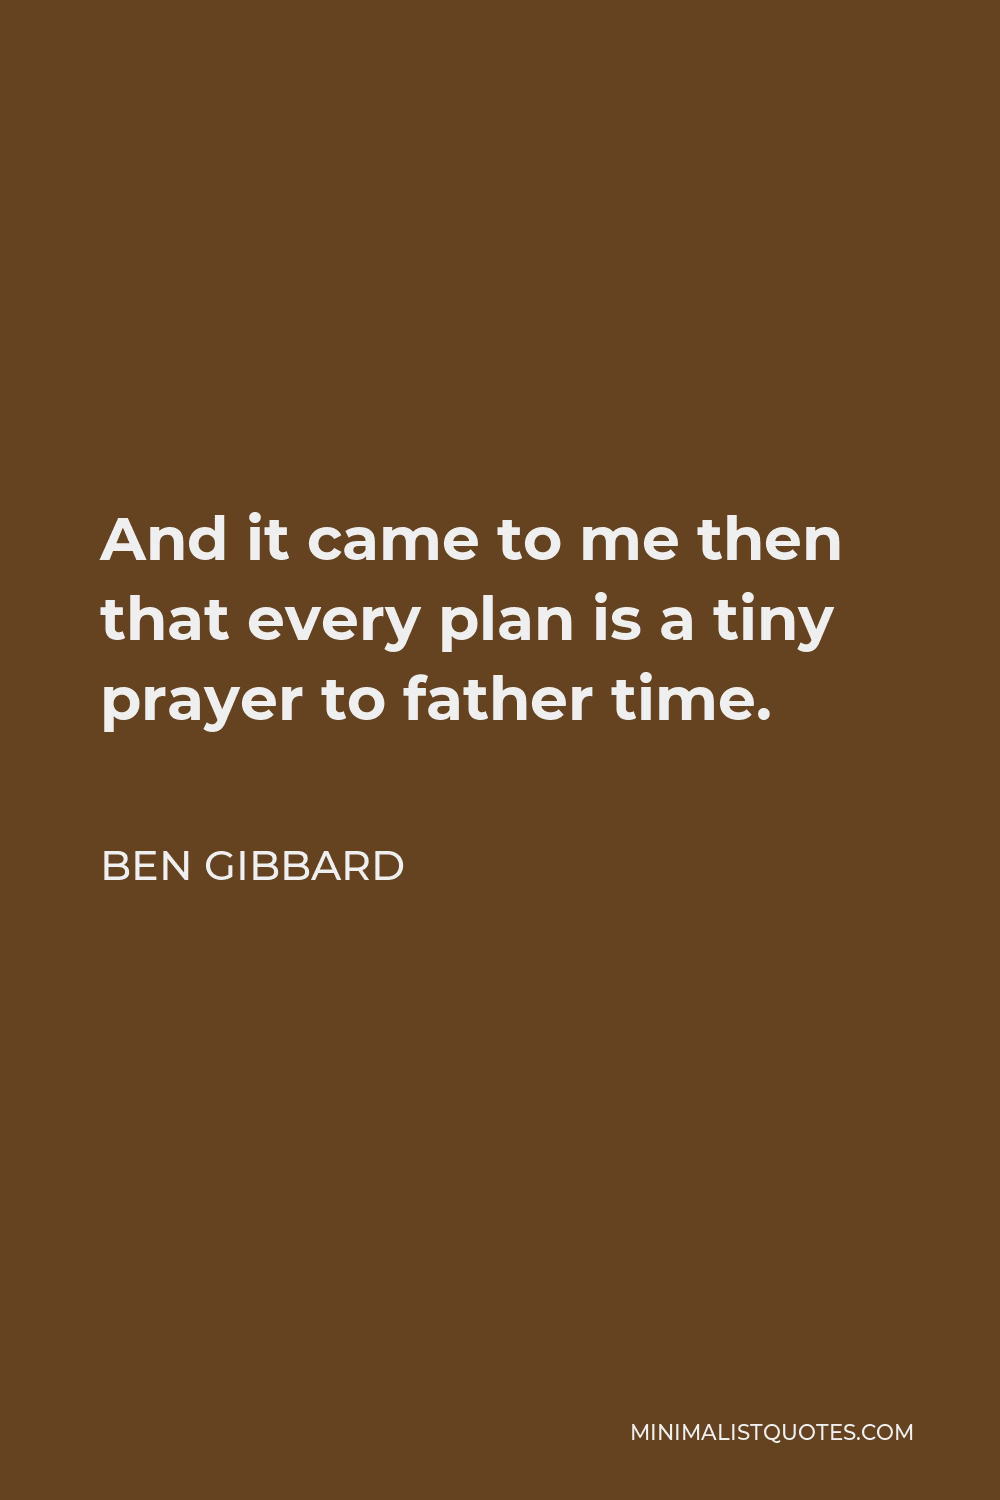 Ben Gibbard Quote - And it came to me then that every plan is a tiny prayer to father time.